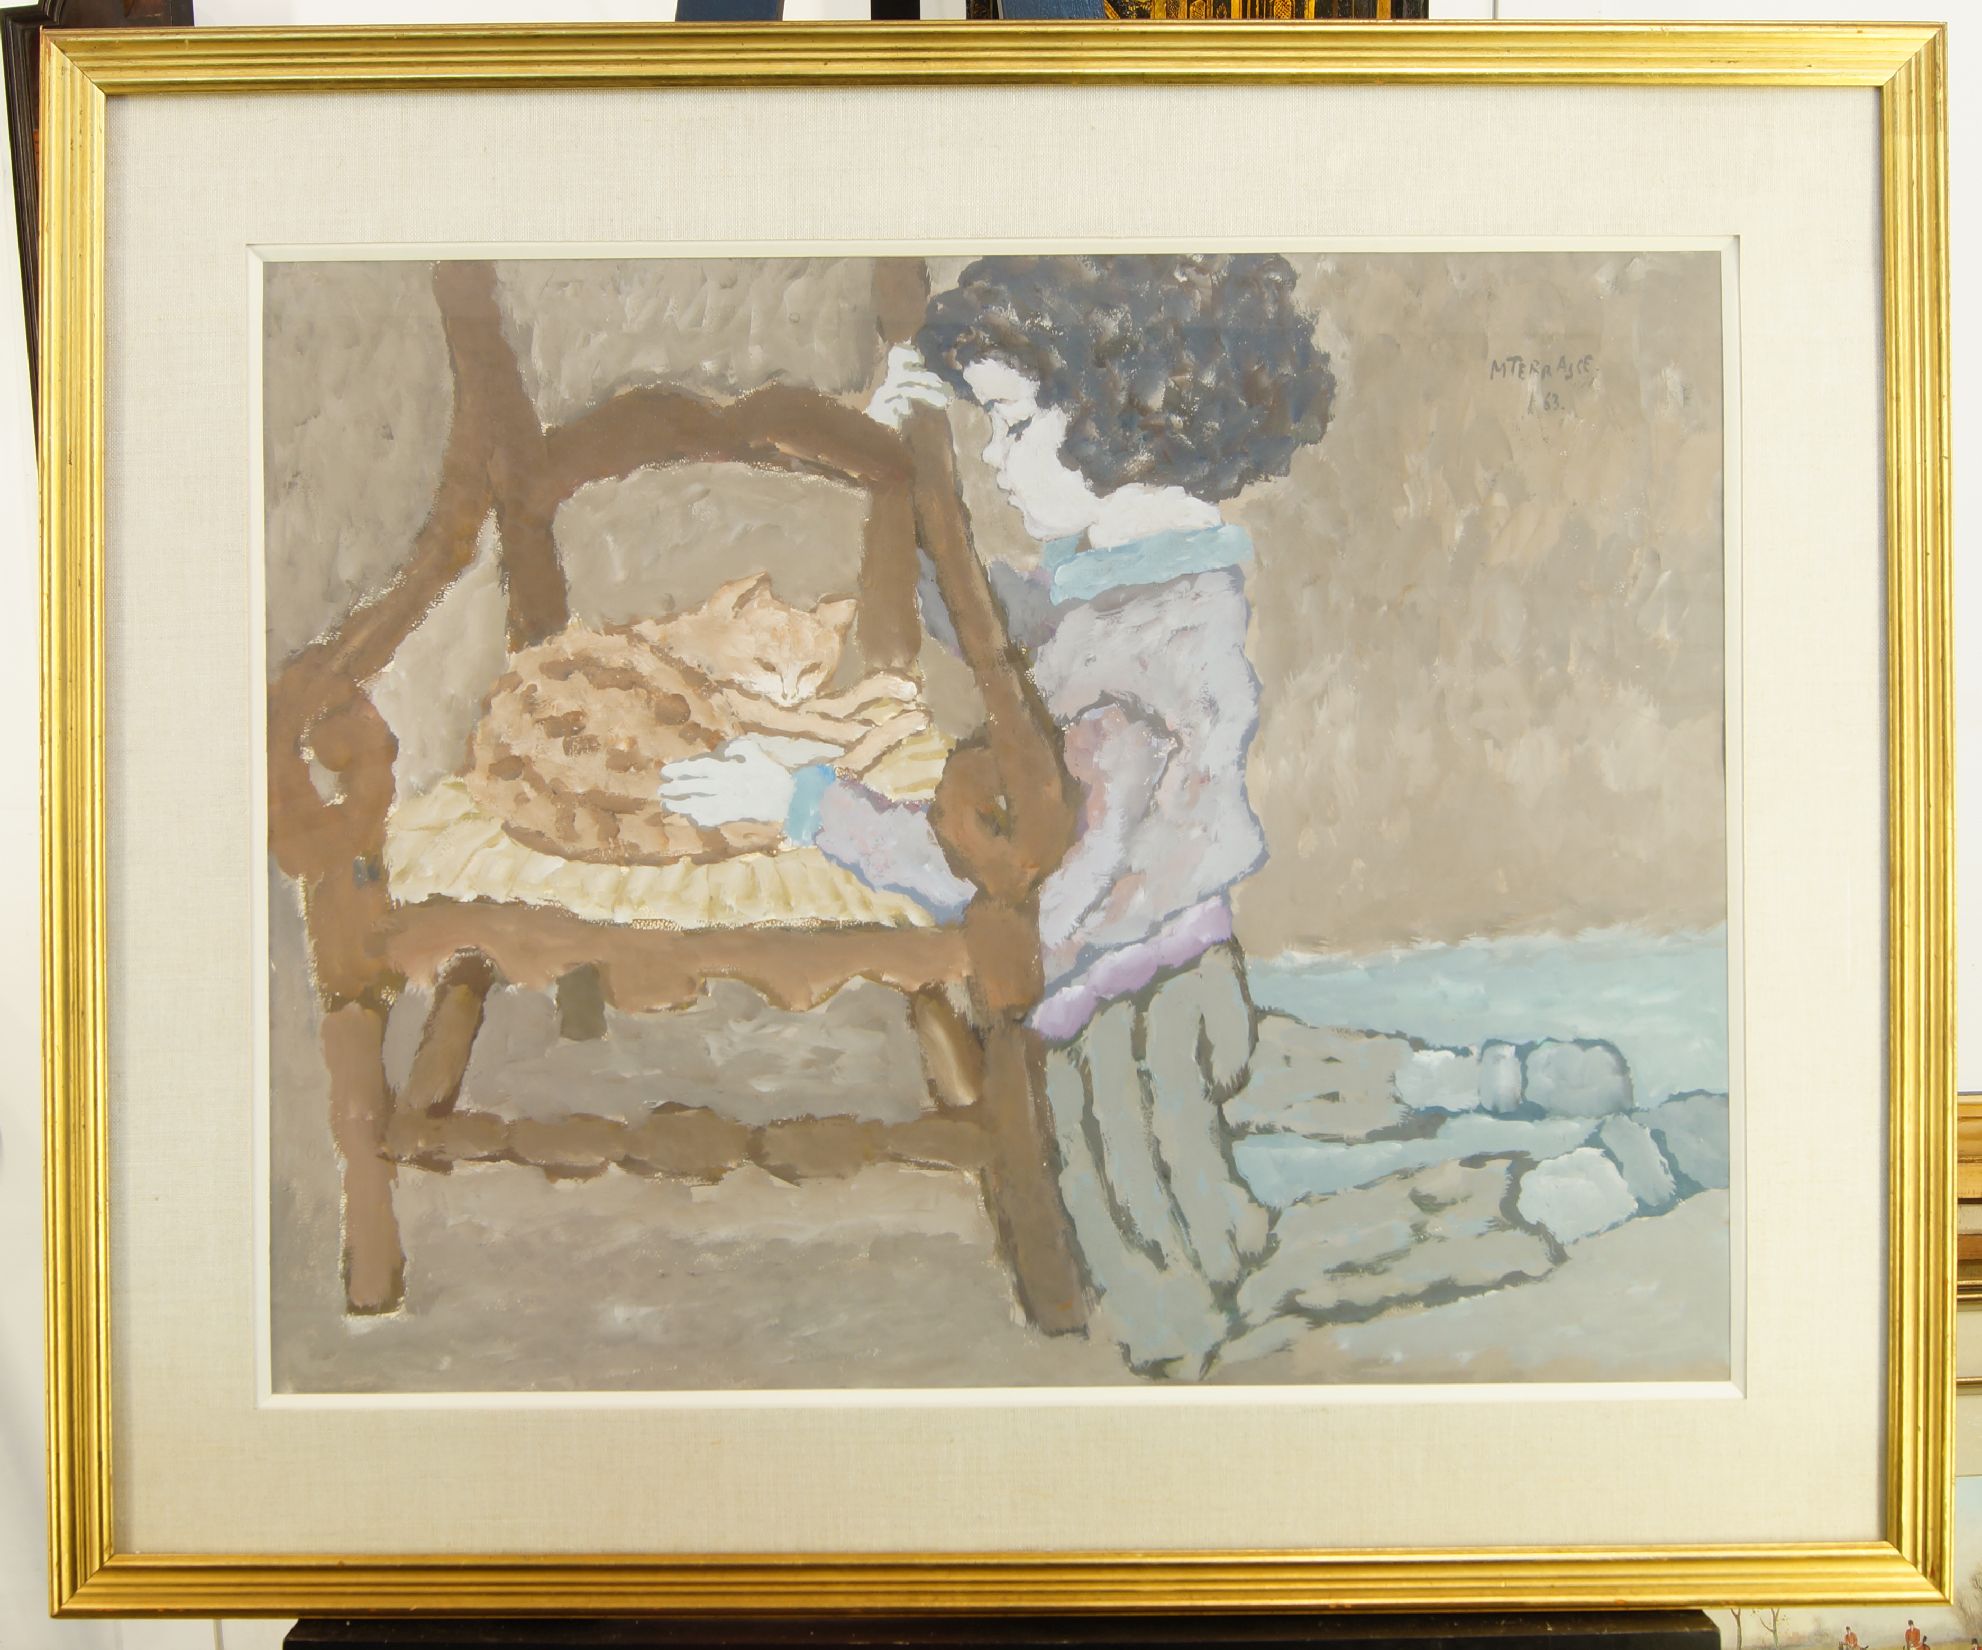 Michel Terrasse, French 1928-2002- Isabelle et la chatte Noisette, 1963; oil on paper, signed and - Image 2 of 2